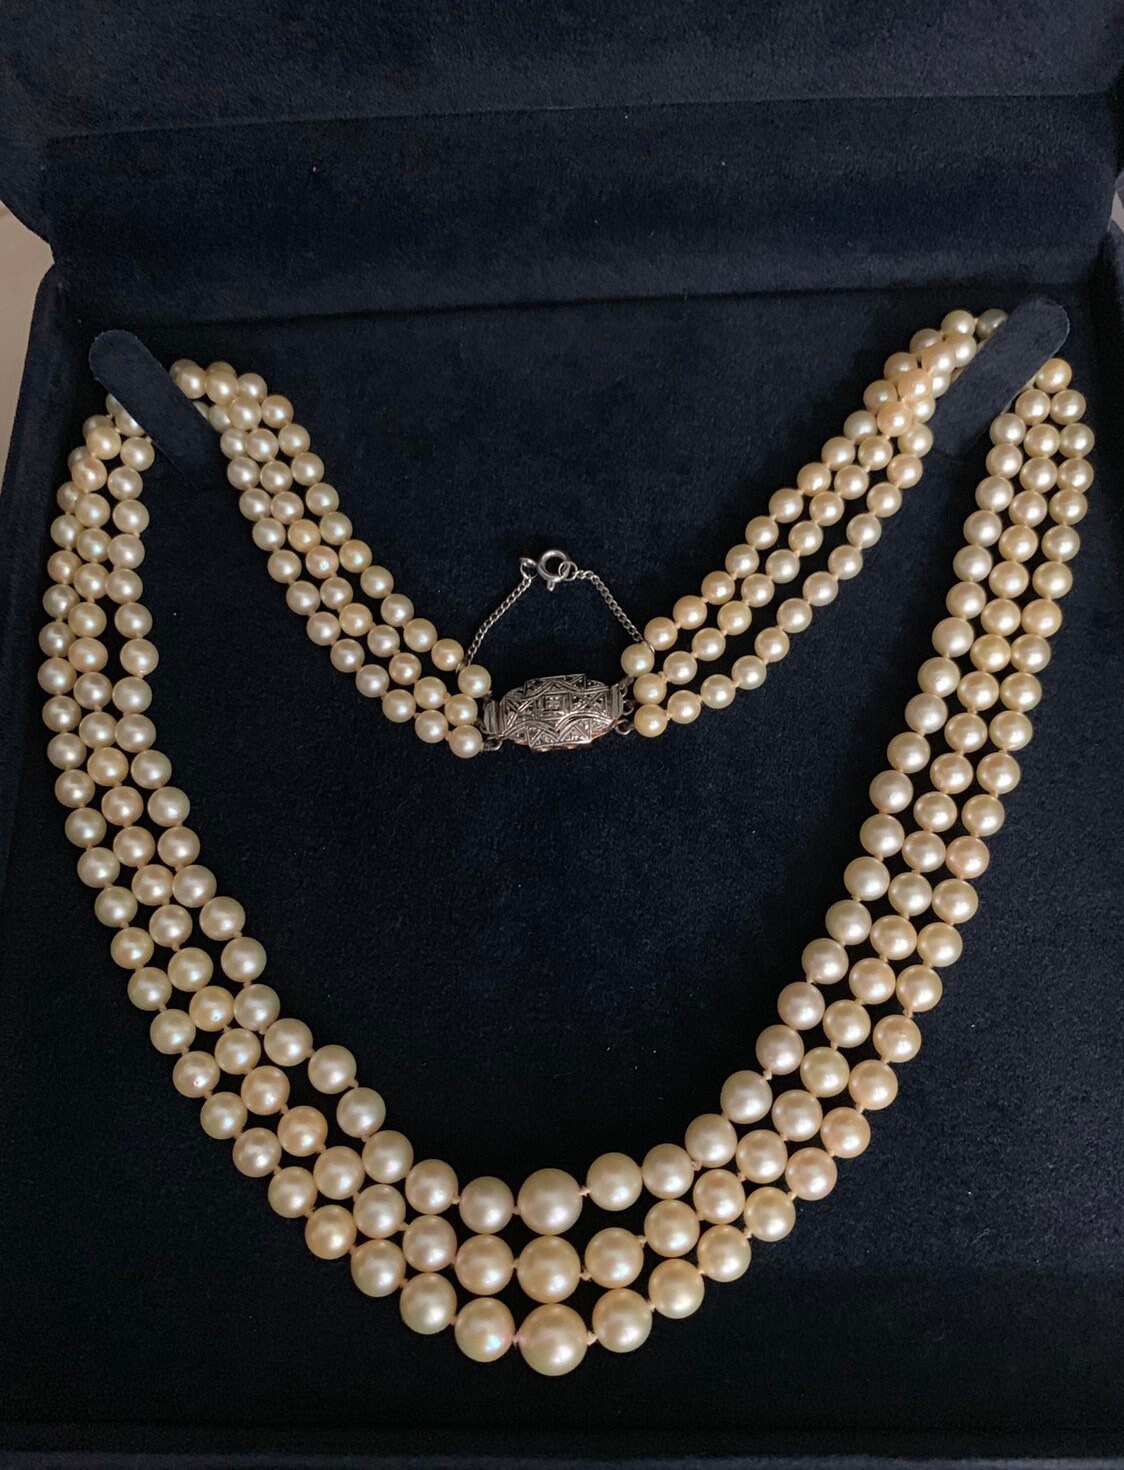 Vintage exquisite resin pearl necklace necklace Chanel style vintage  Wenqing Japanese second-hand medieval jewelry - Shop Mr.Travel Genius  Antique shop Necklaces - Pinkoi